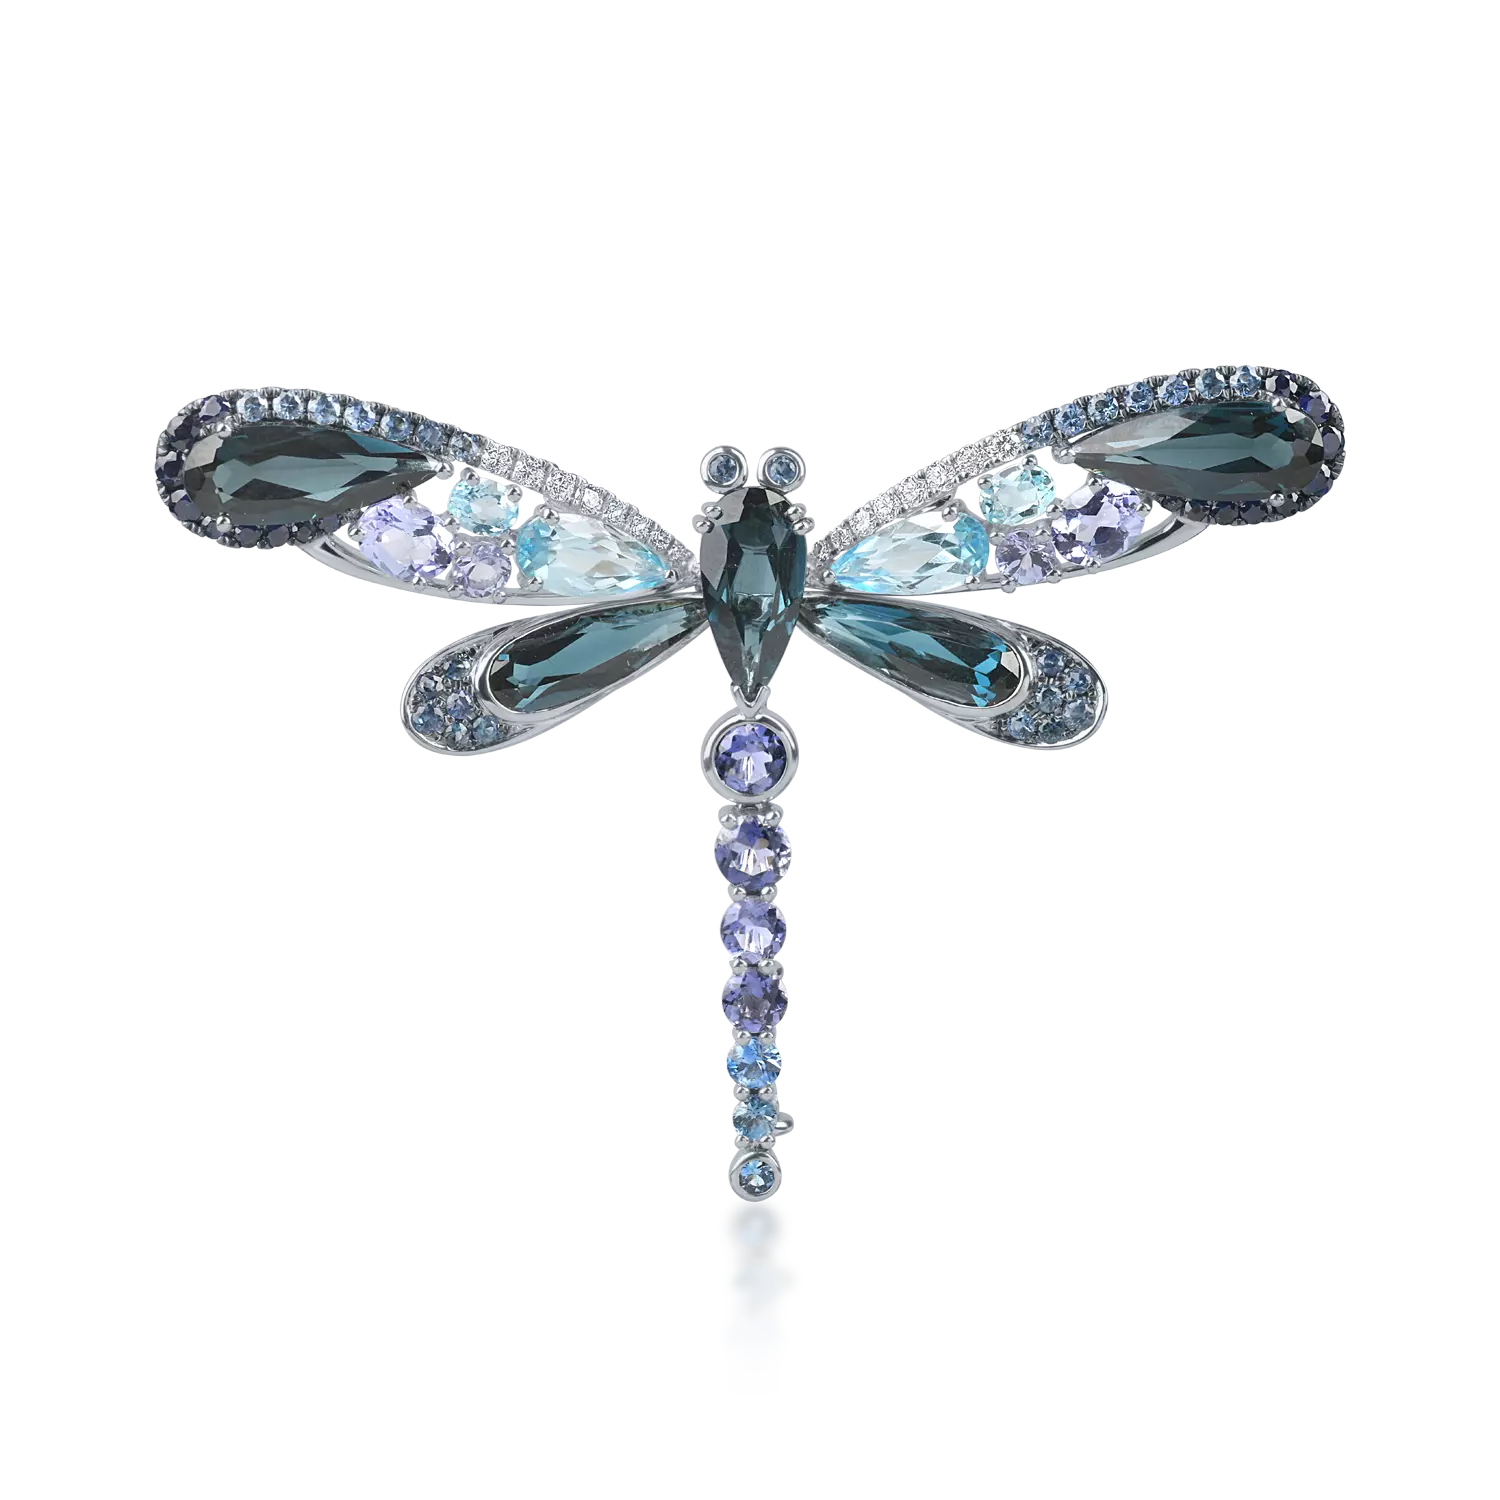 White gold dragonfly brooch with 12.5ct topazes and sapphires